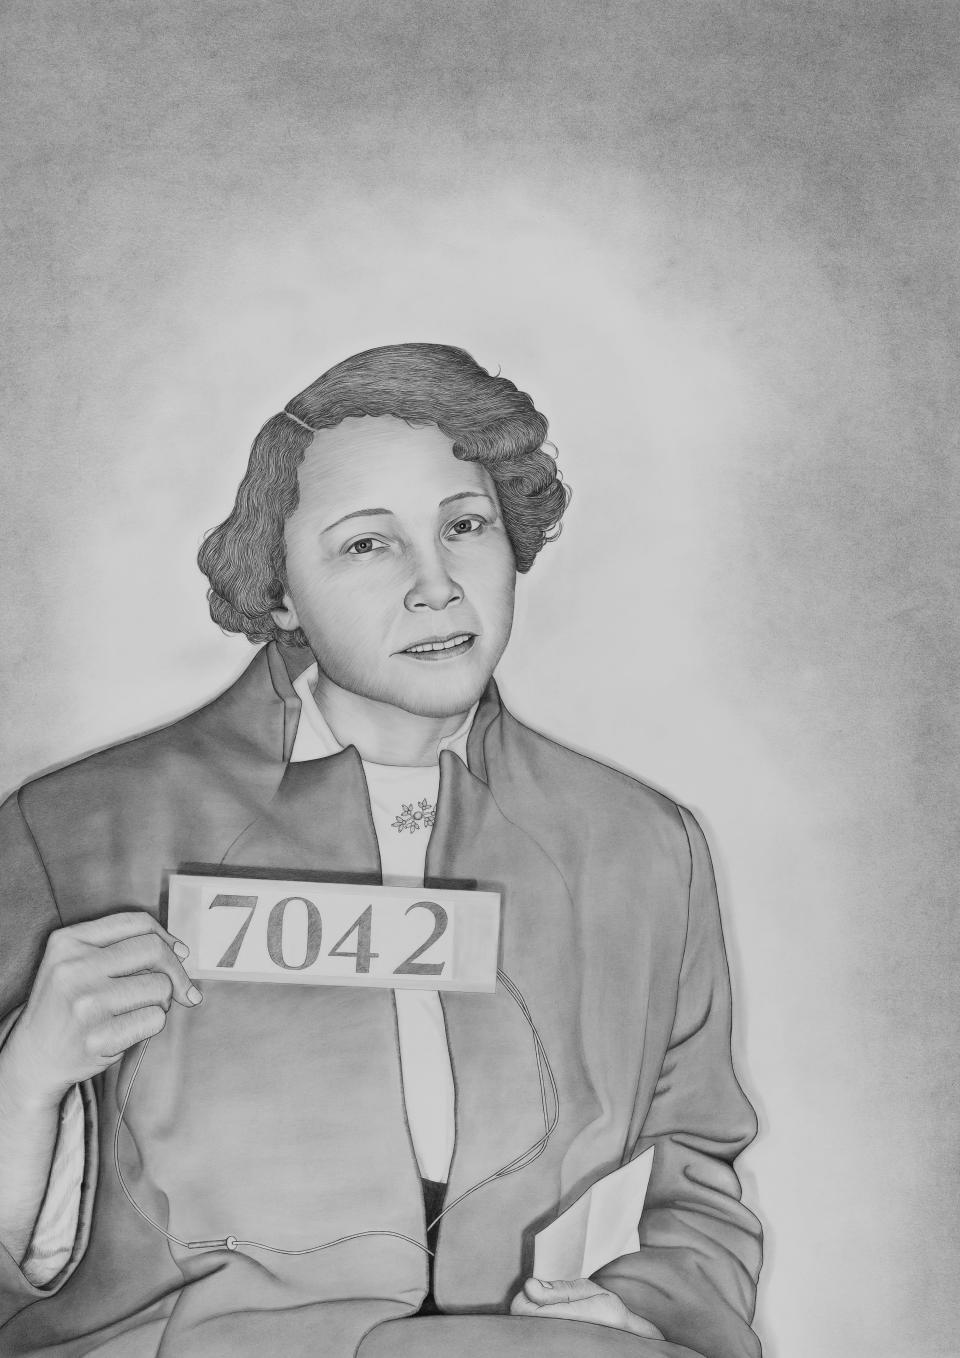 Lava Thomas, Ms. Jo Ann Robinson, 2018, from the series, Mugshot Portraits: Women of the Montgomery Bus Boycott, graphite and Conté pencil on paper, 47 x 33 1/4 inches, Collection of Janet Mohle-Boetani, MD, San Francisco, California.